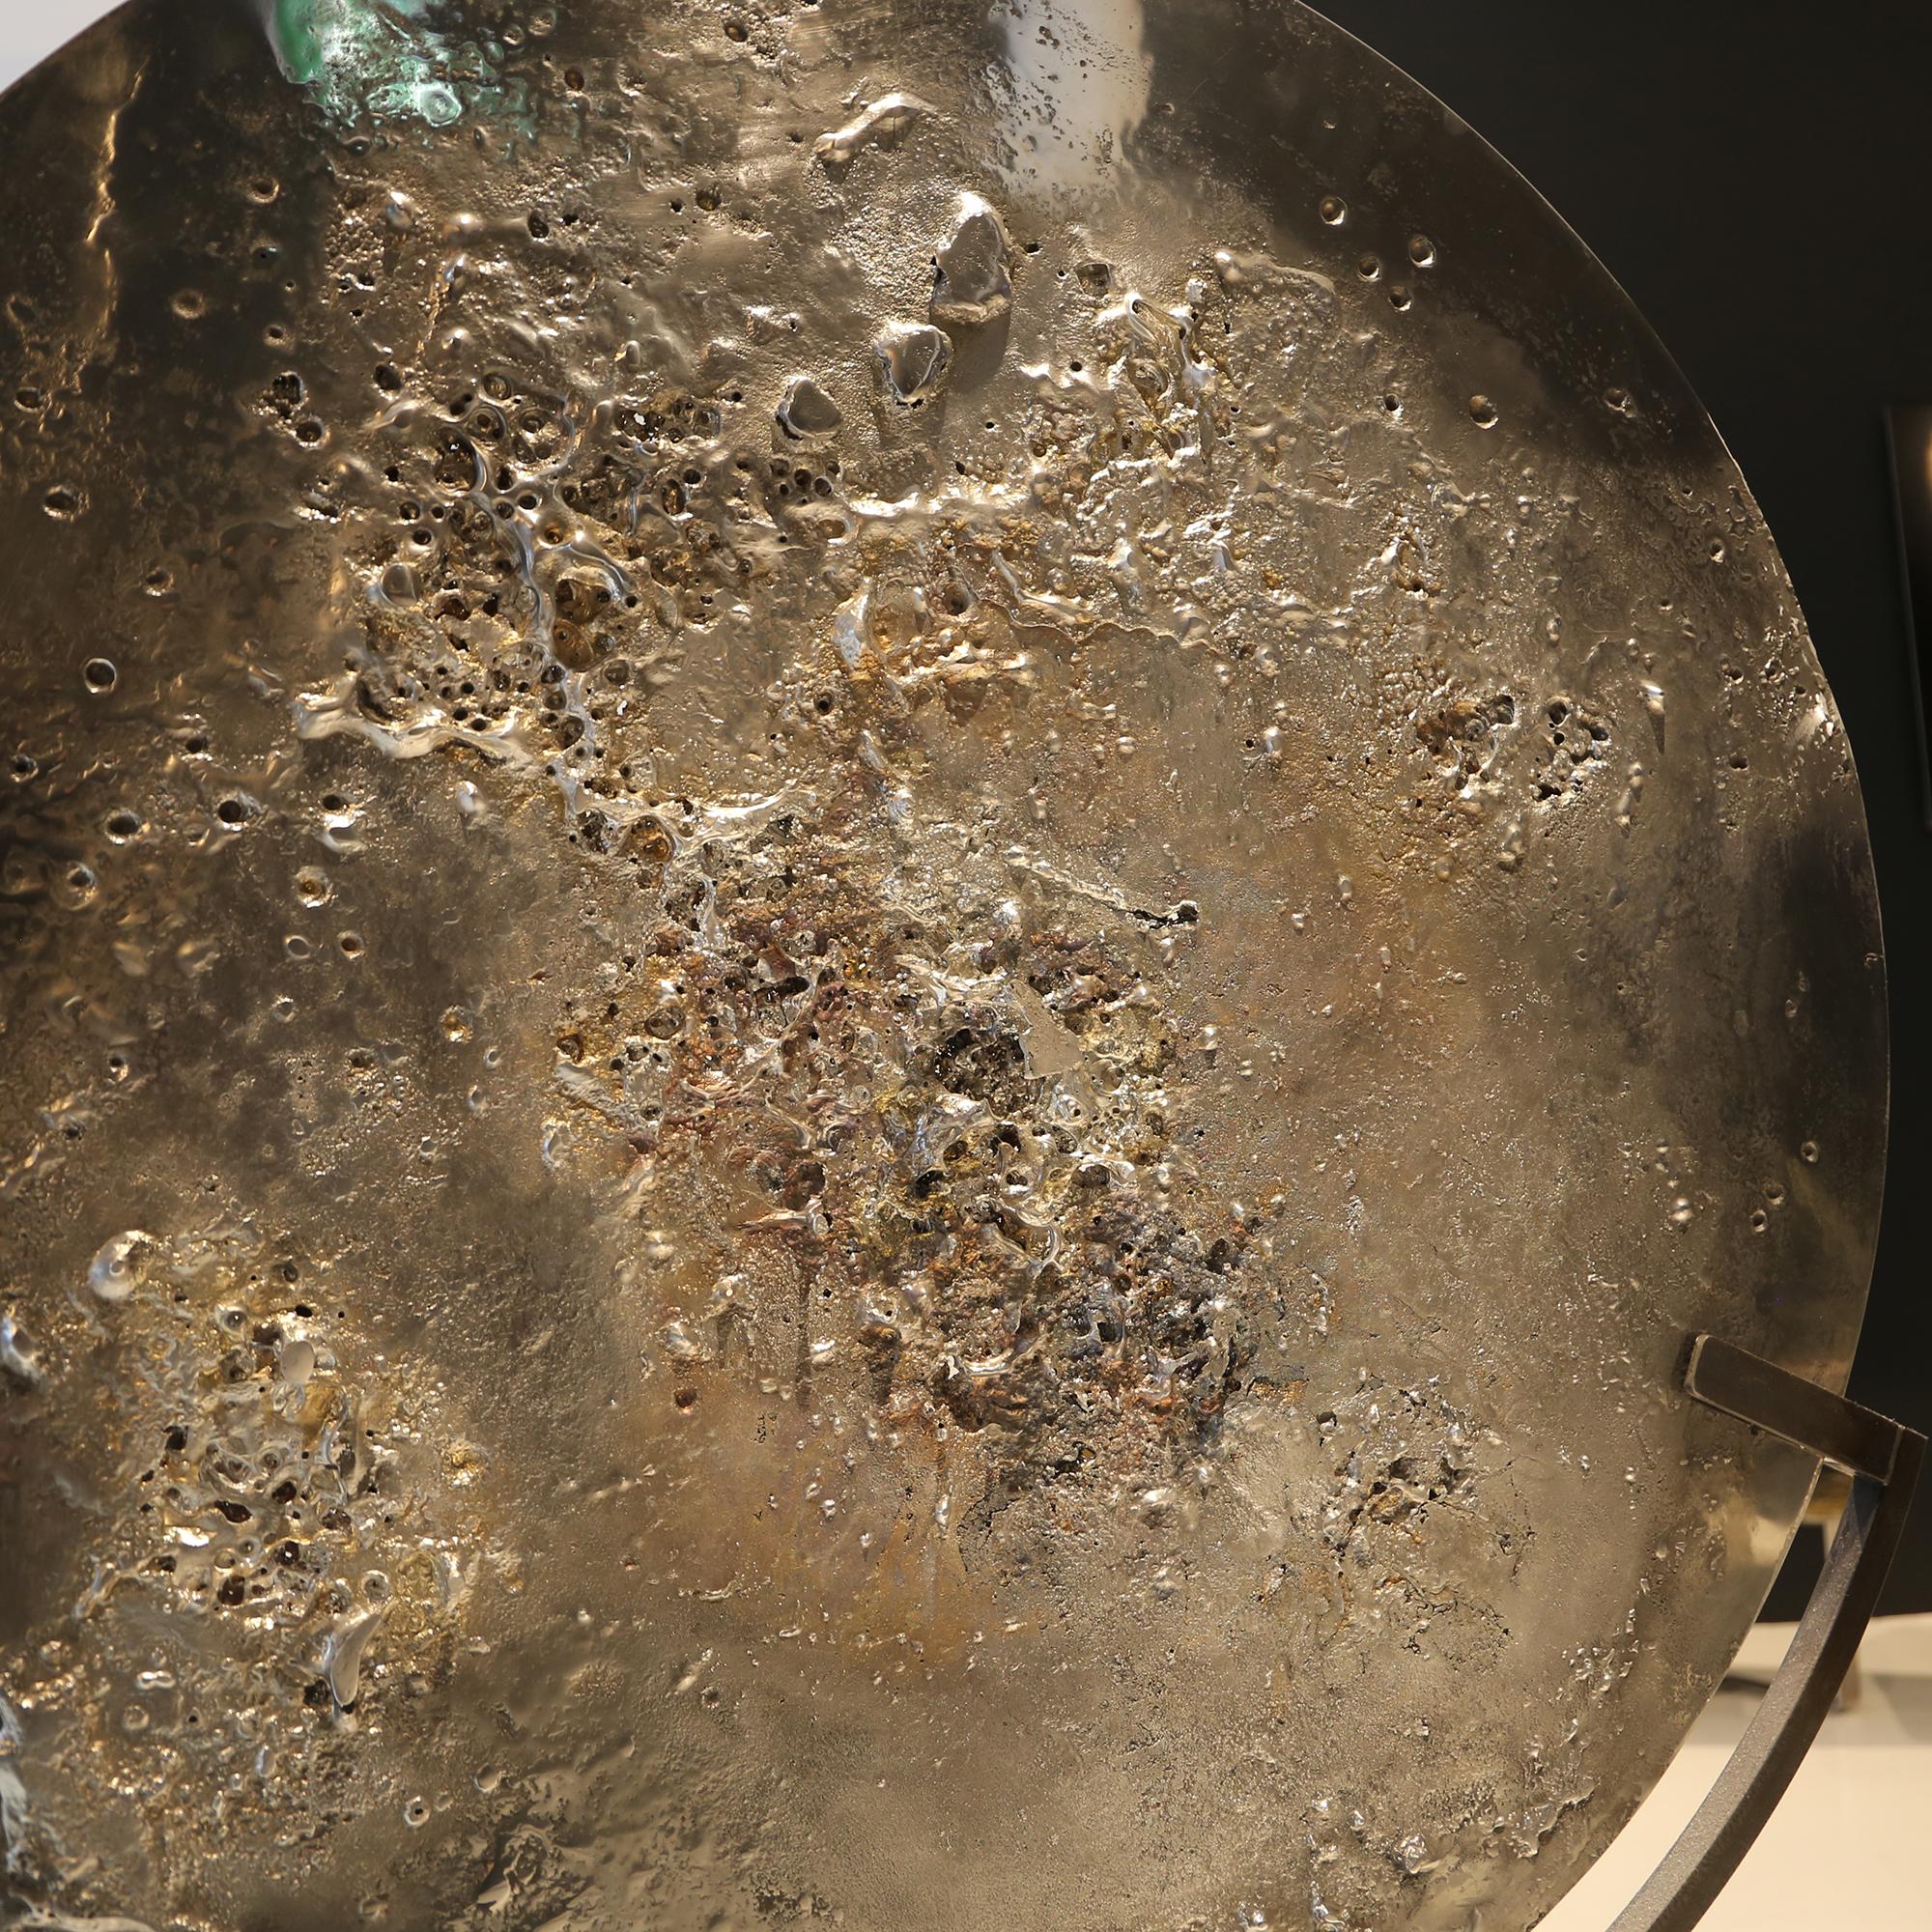 In stock: This piece of art is a pure Alchemy experimentation with pewter, made in France.
It is made of melted pewter, being subjected to Hot-cold thermal shocks. Cooled bubbles, colored stains, craters emerged from this secret experimentation. One